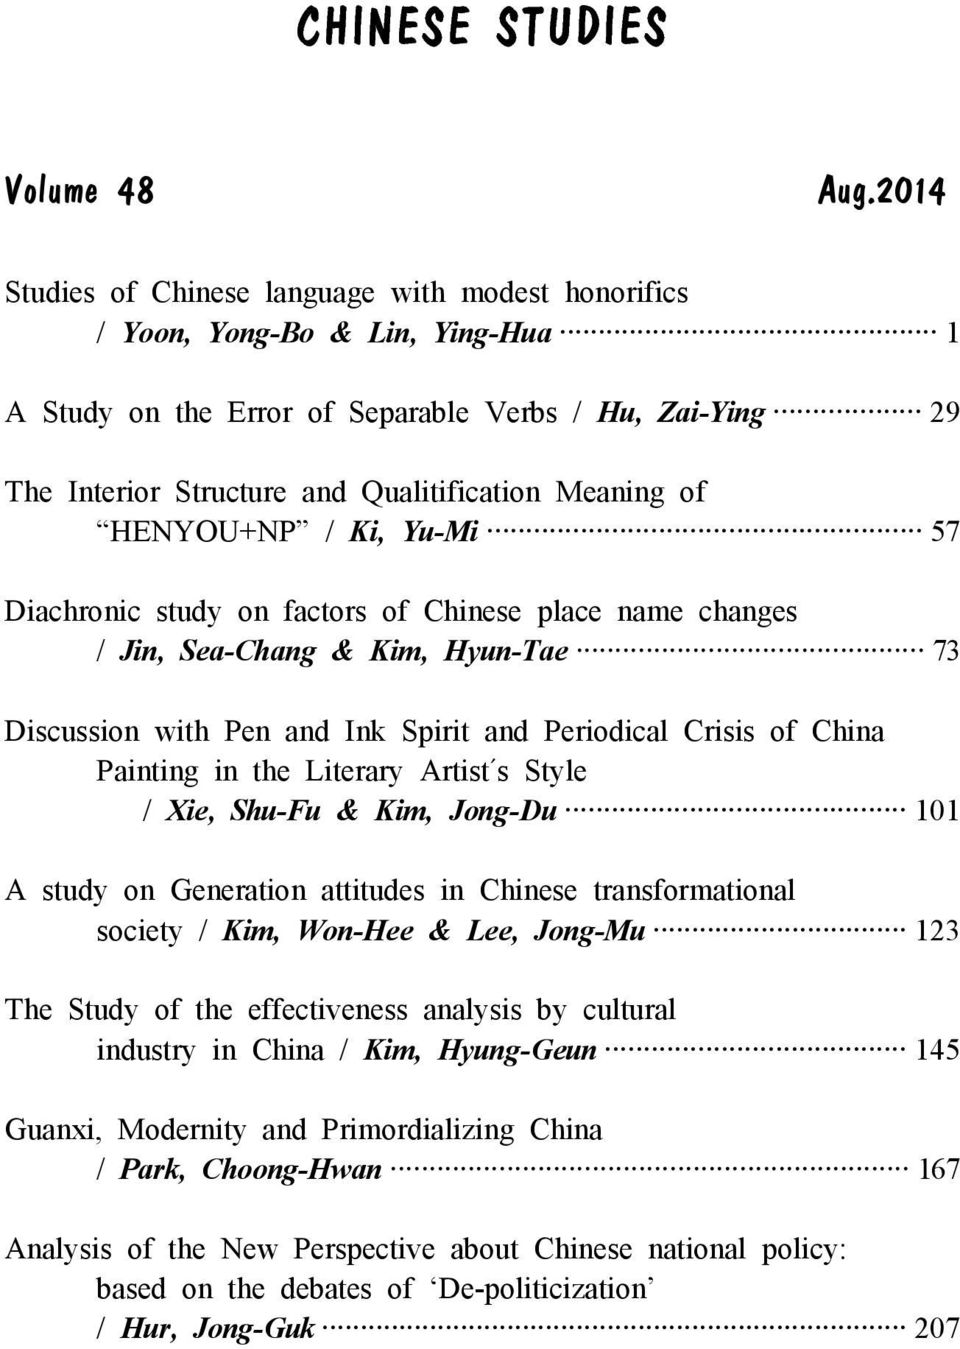 of HENYOU+NP / Ki, Yu-Mi 57 Diachronic study on factors of Chinese place name changes / Jin, Sea-Chang & Kim, Hyun-Tae 73 Discussion with Pen and Ink Spirit and Periodical Crisis of China Painting in